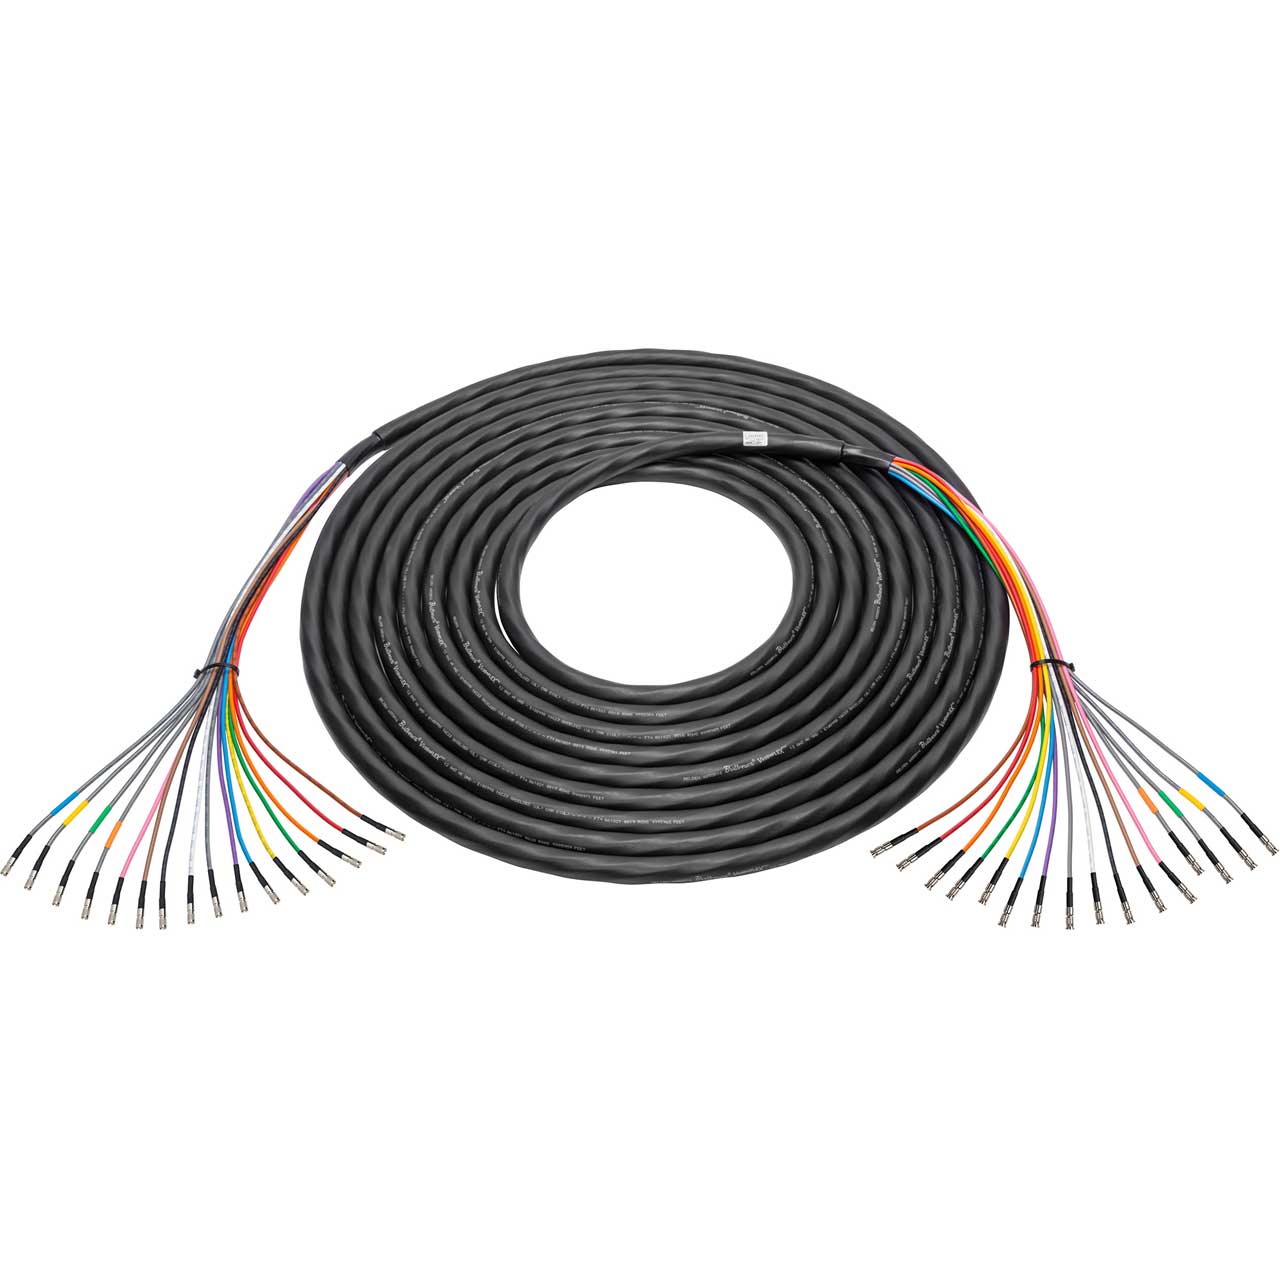 Laird 4855R16-D-MB-125 16-Channel 12G-SDI / 4K UHD DIN 1.0 / 2.3 Male to HD BNC Male Snake Cable - 125 Foot 4855R16-D-MB-125